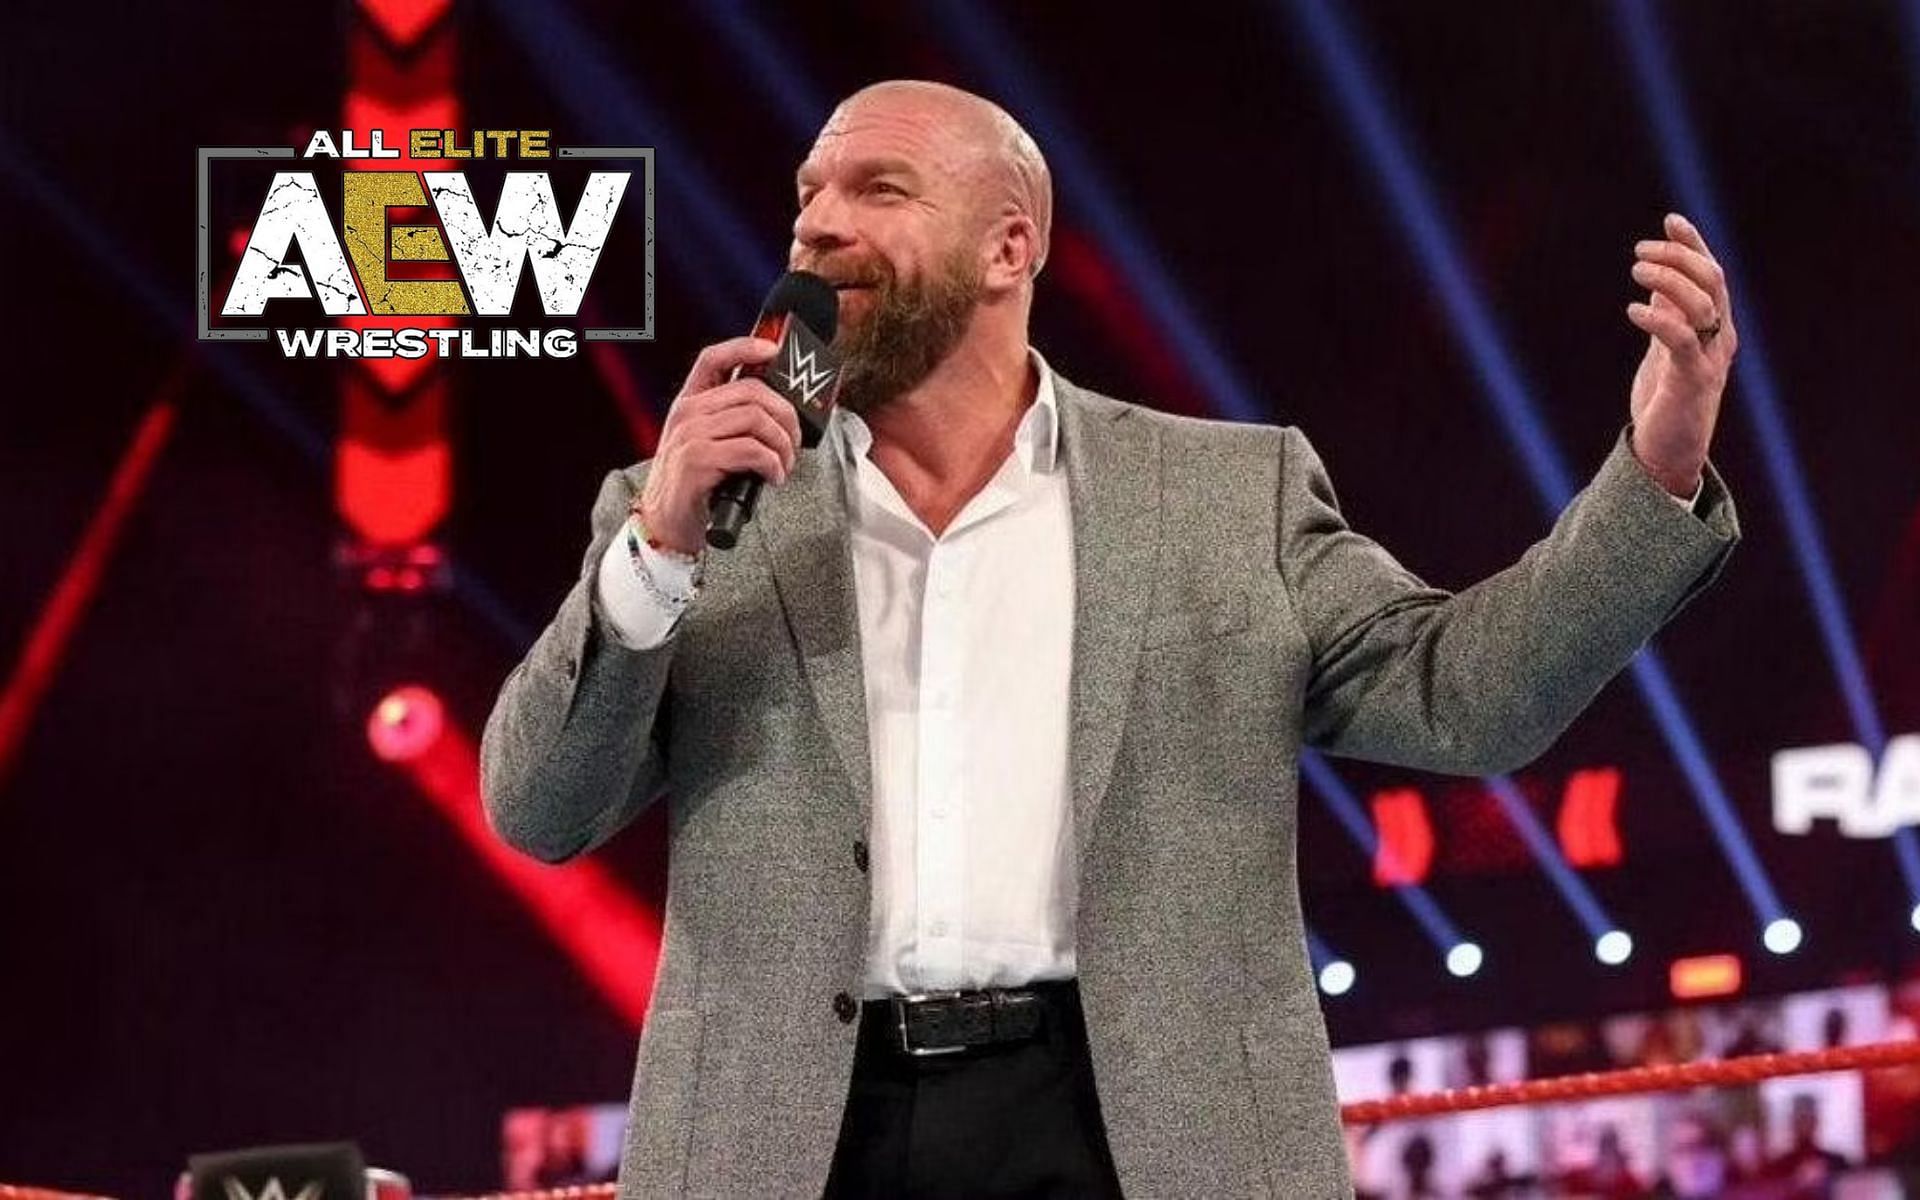 Triple H seemingly took a swipe at AEW in an opening segment of this week